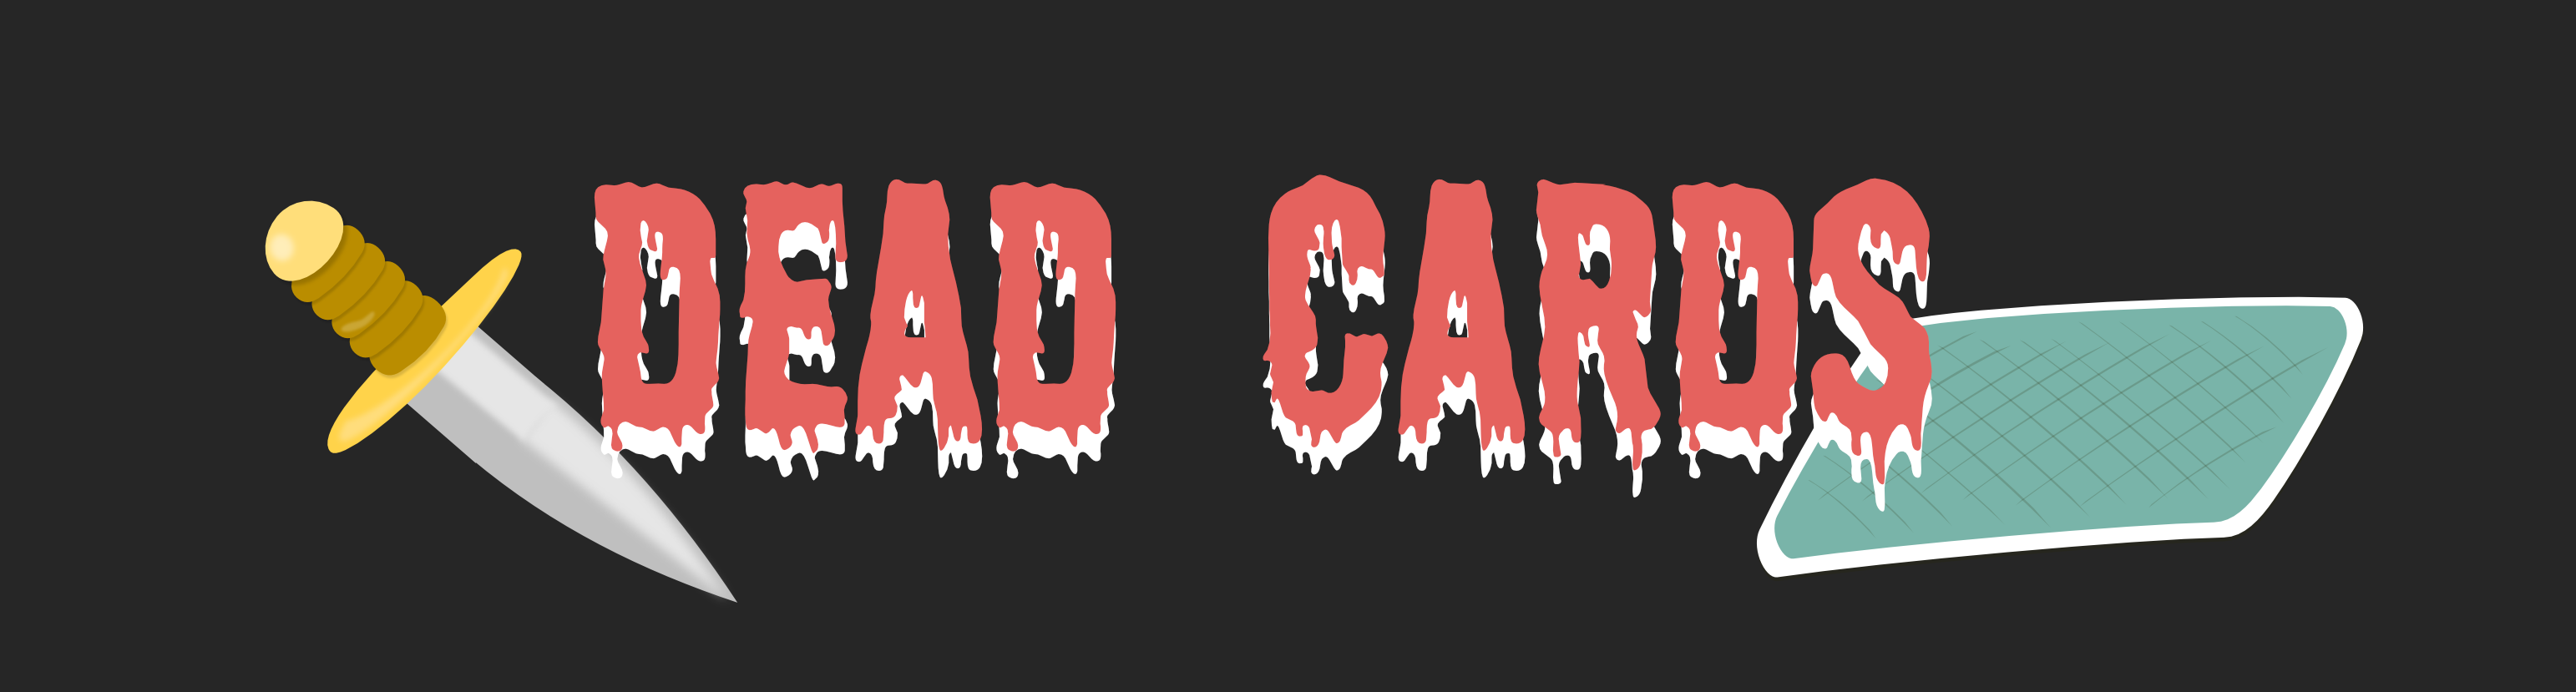 DEAD CARDS